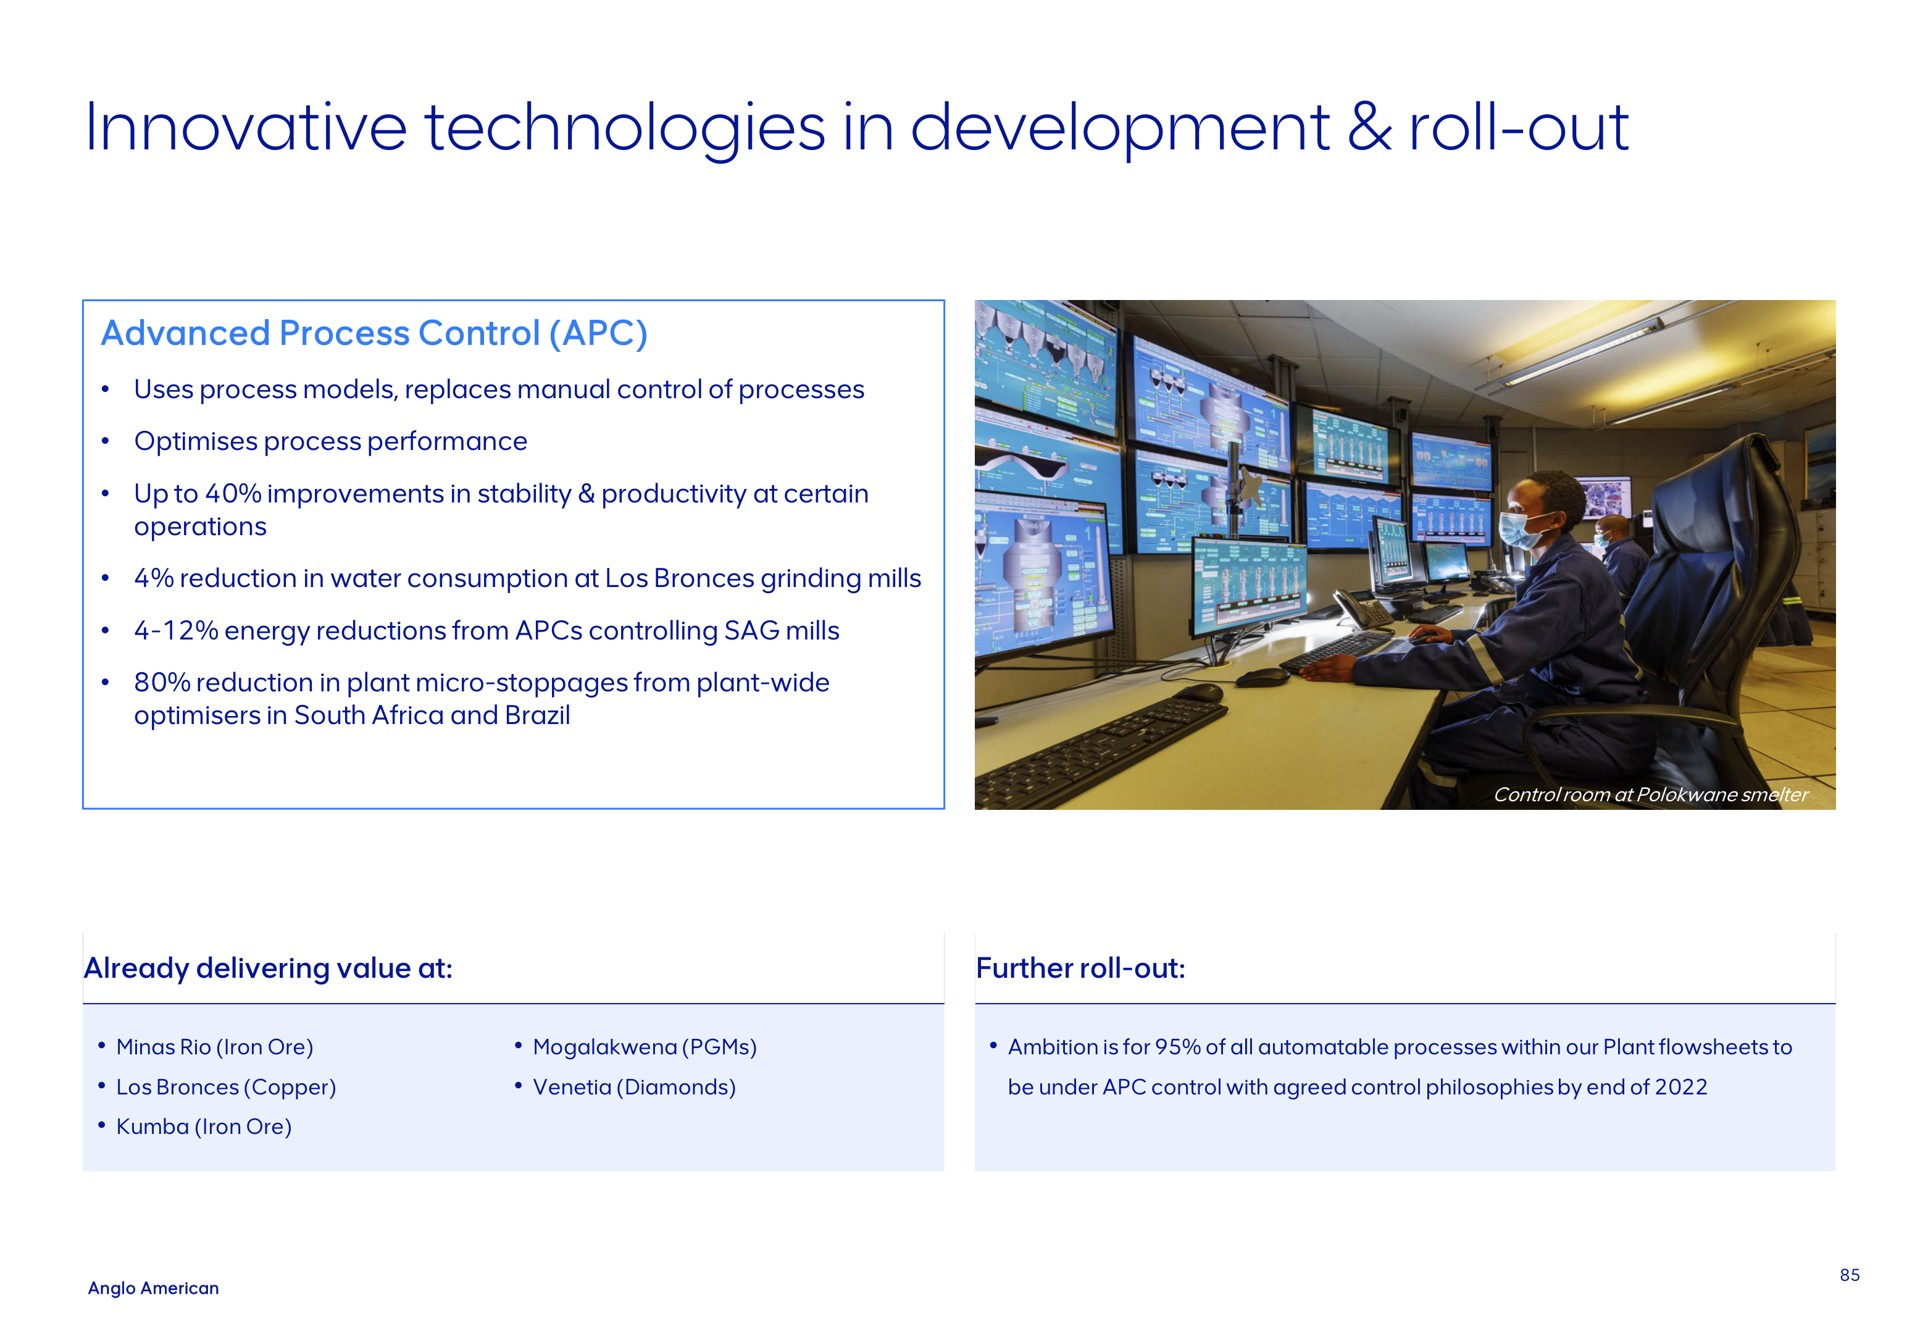 innovative technologies in development roll out | AngloAmerican